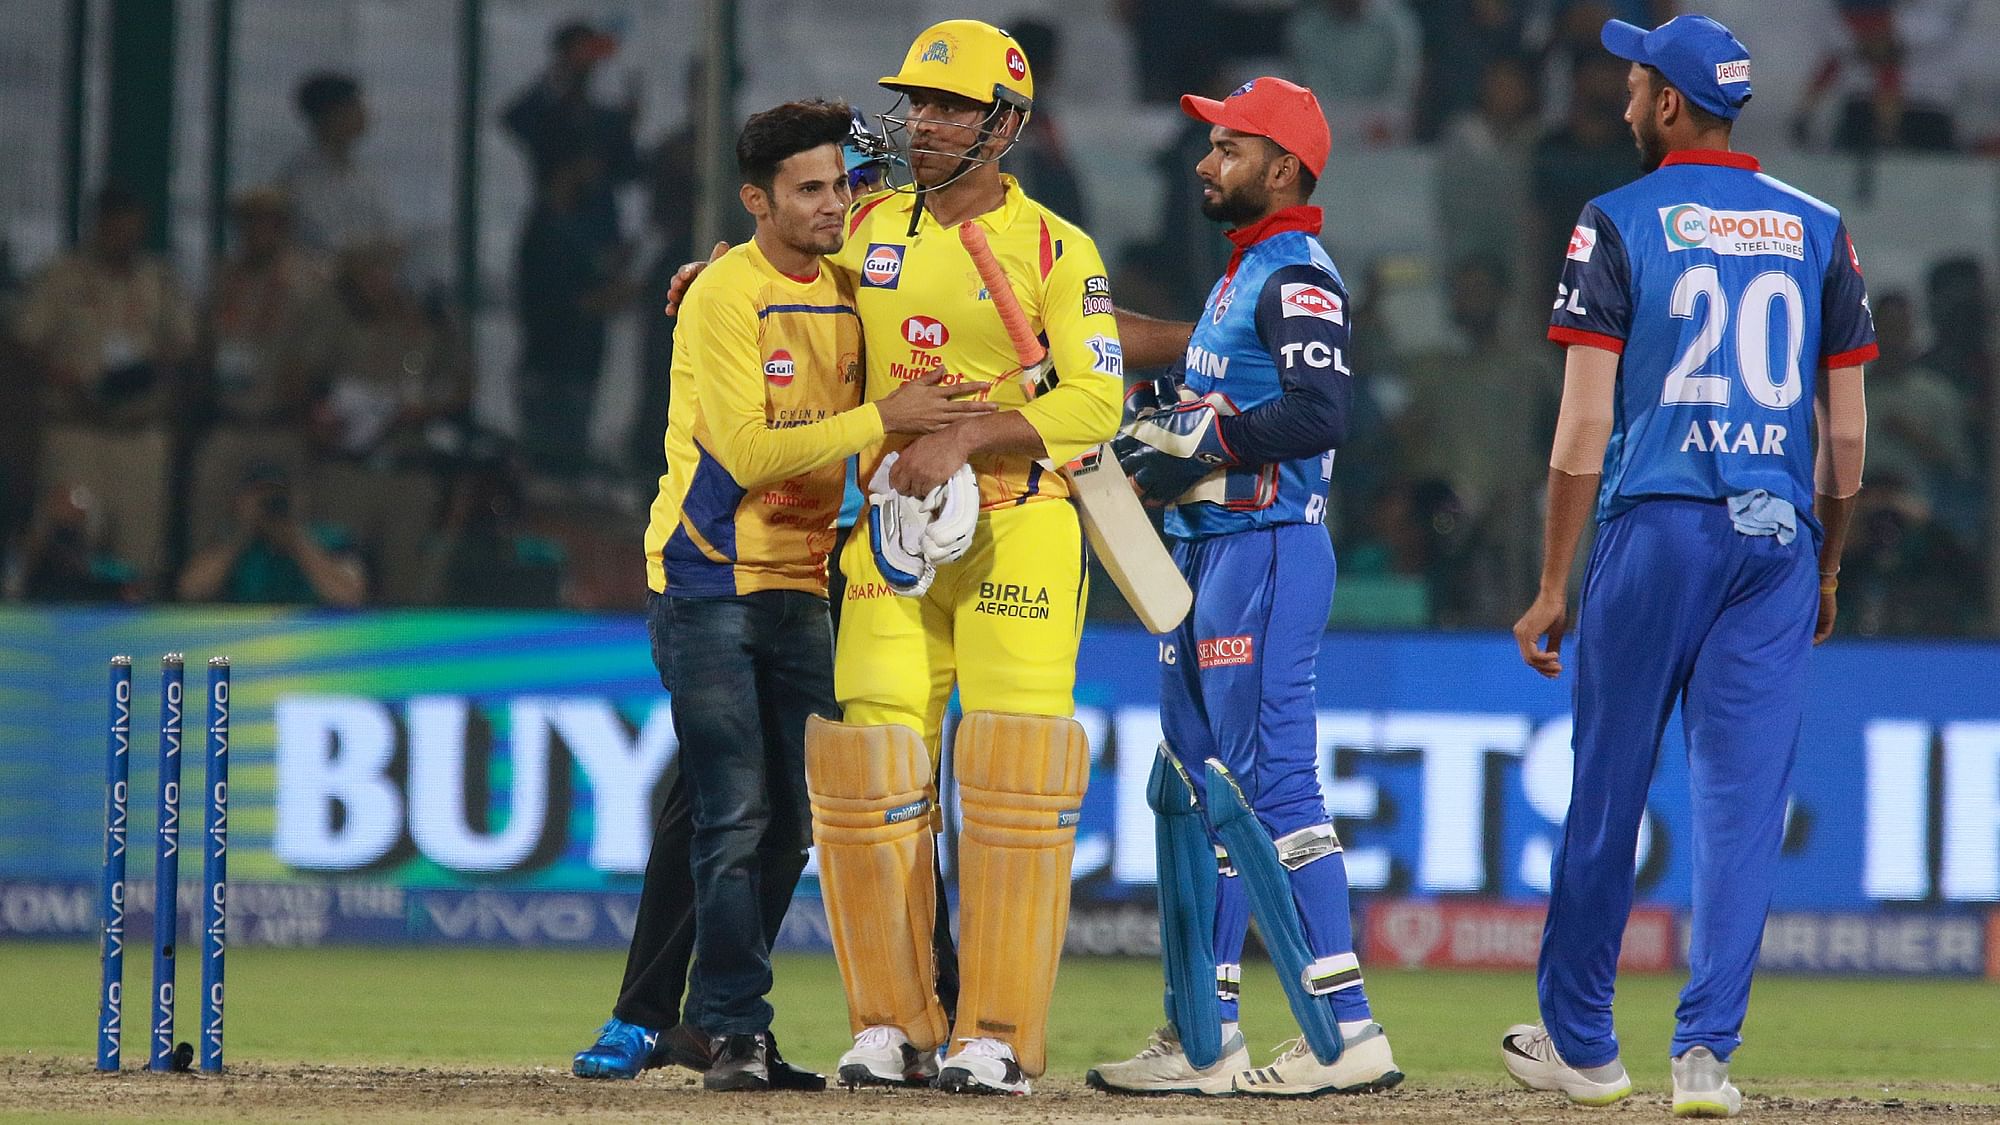 Before being escorted by the security guards, the fan managed to get a hug from Dhoni. 